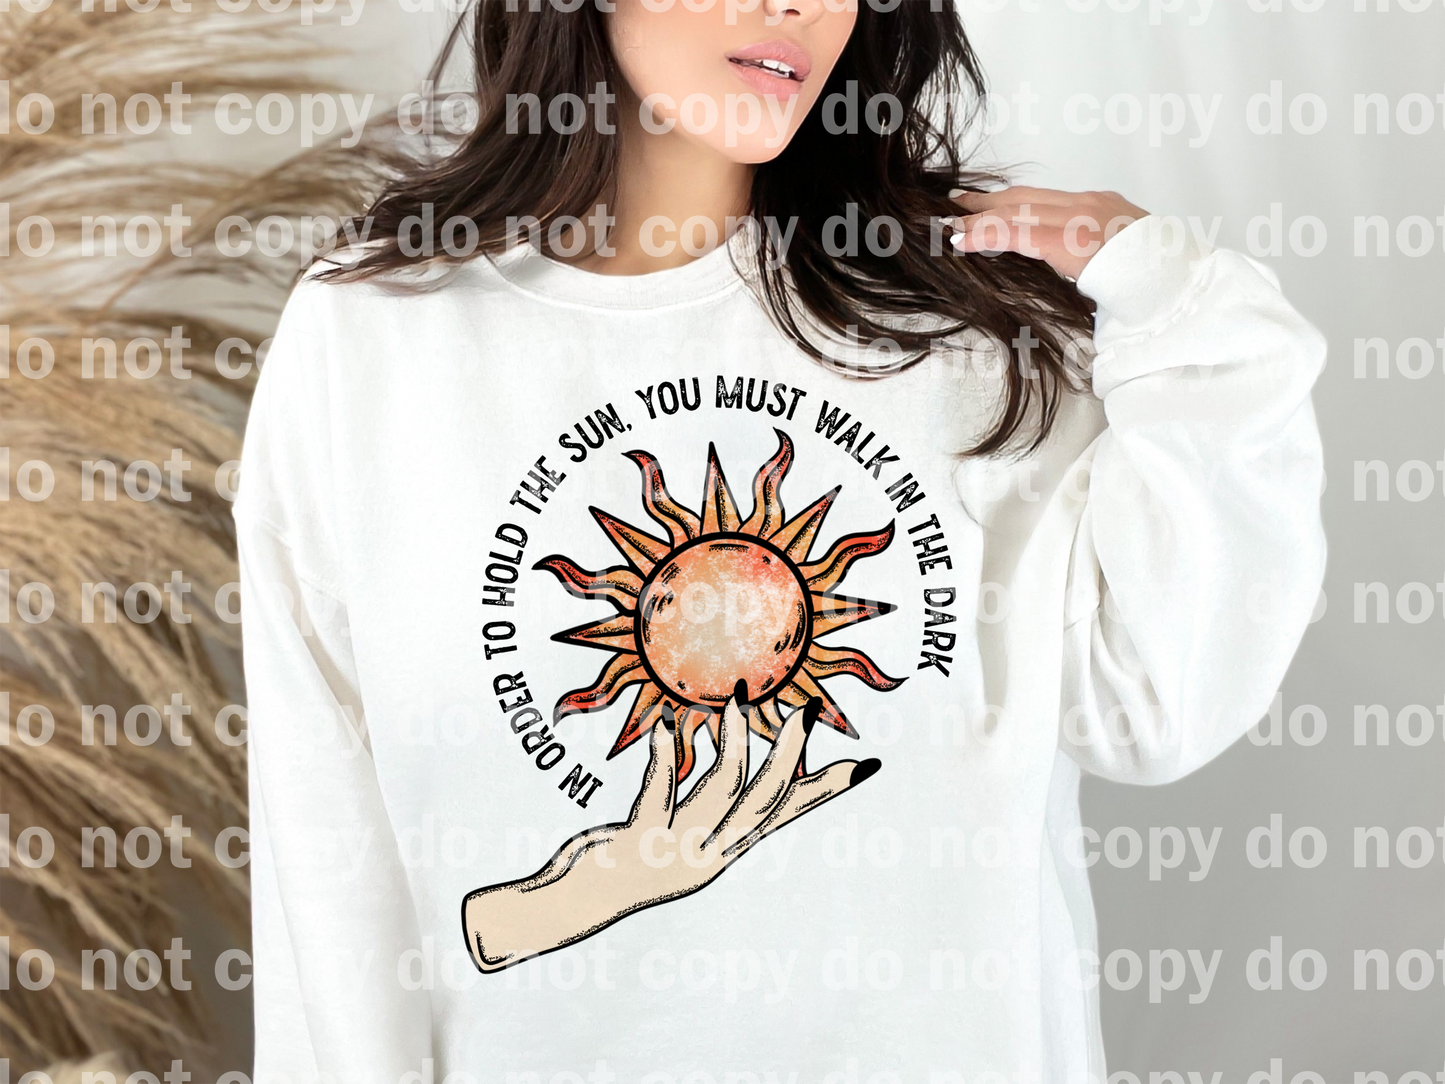 In Order To Hold The Sun You Must Walk In The Dark Dream Print or Sublimation Print